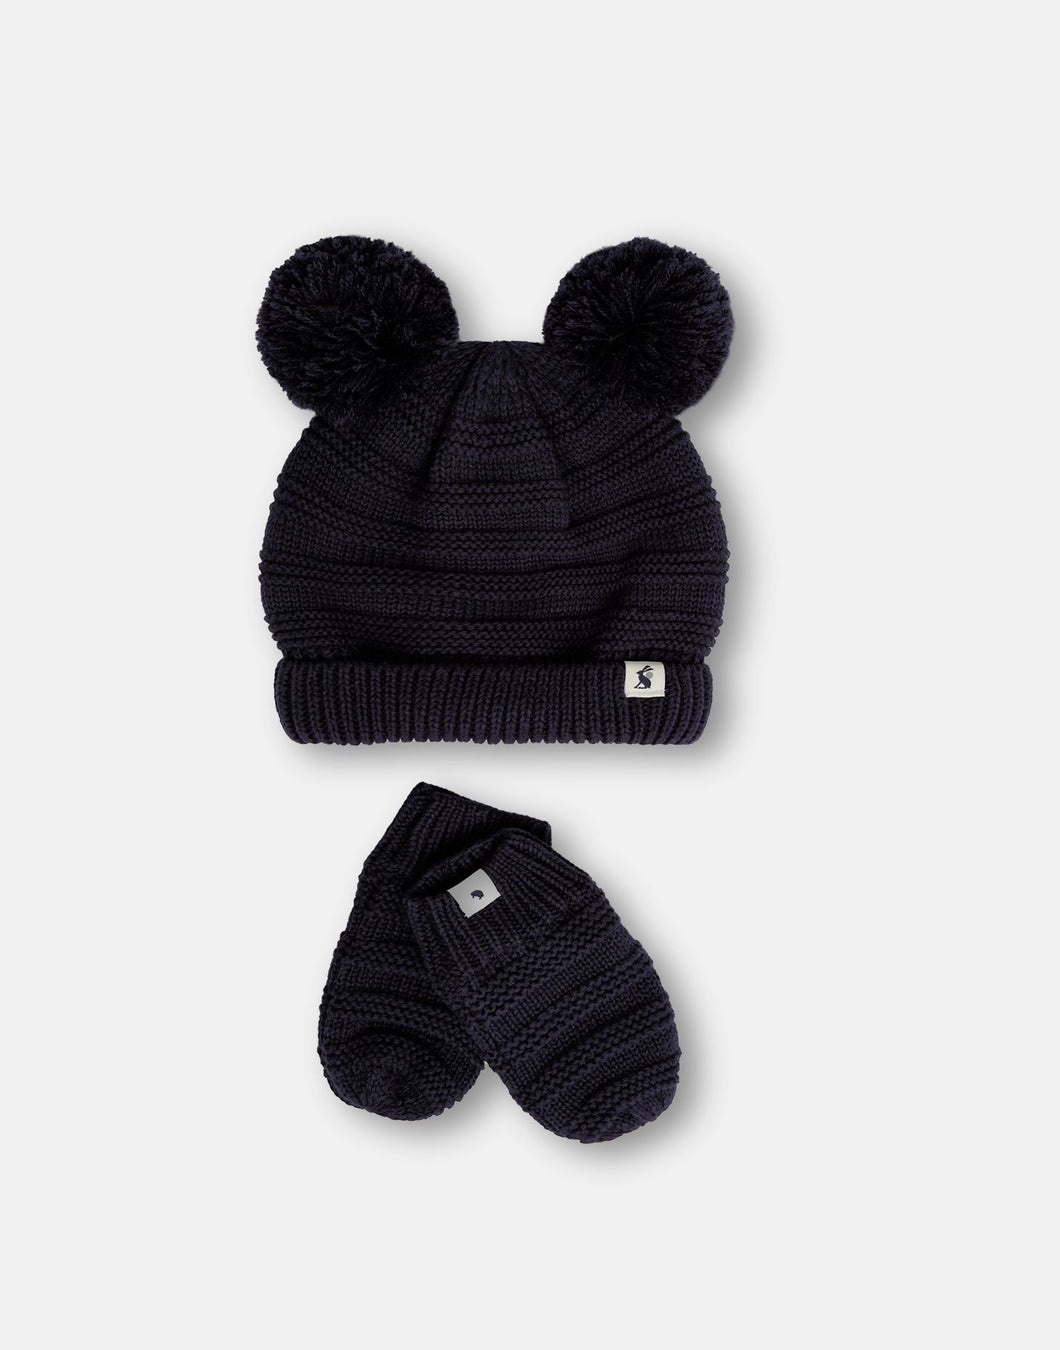 Joules Pom Set Navy Blue Knitted Hat And Glove Set 0-24 Months / 2-4 Years